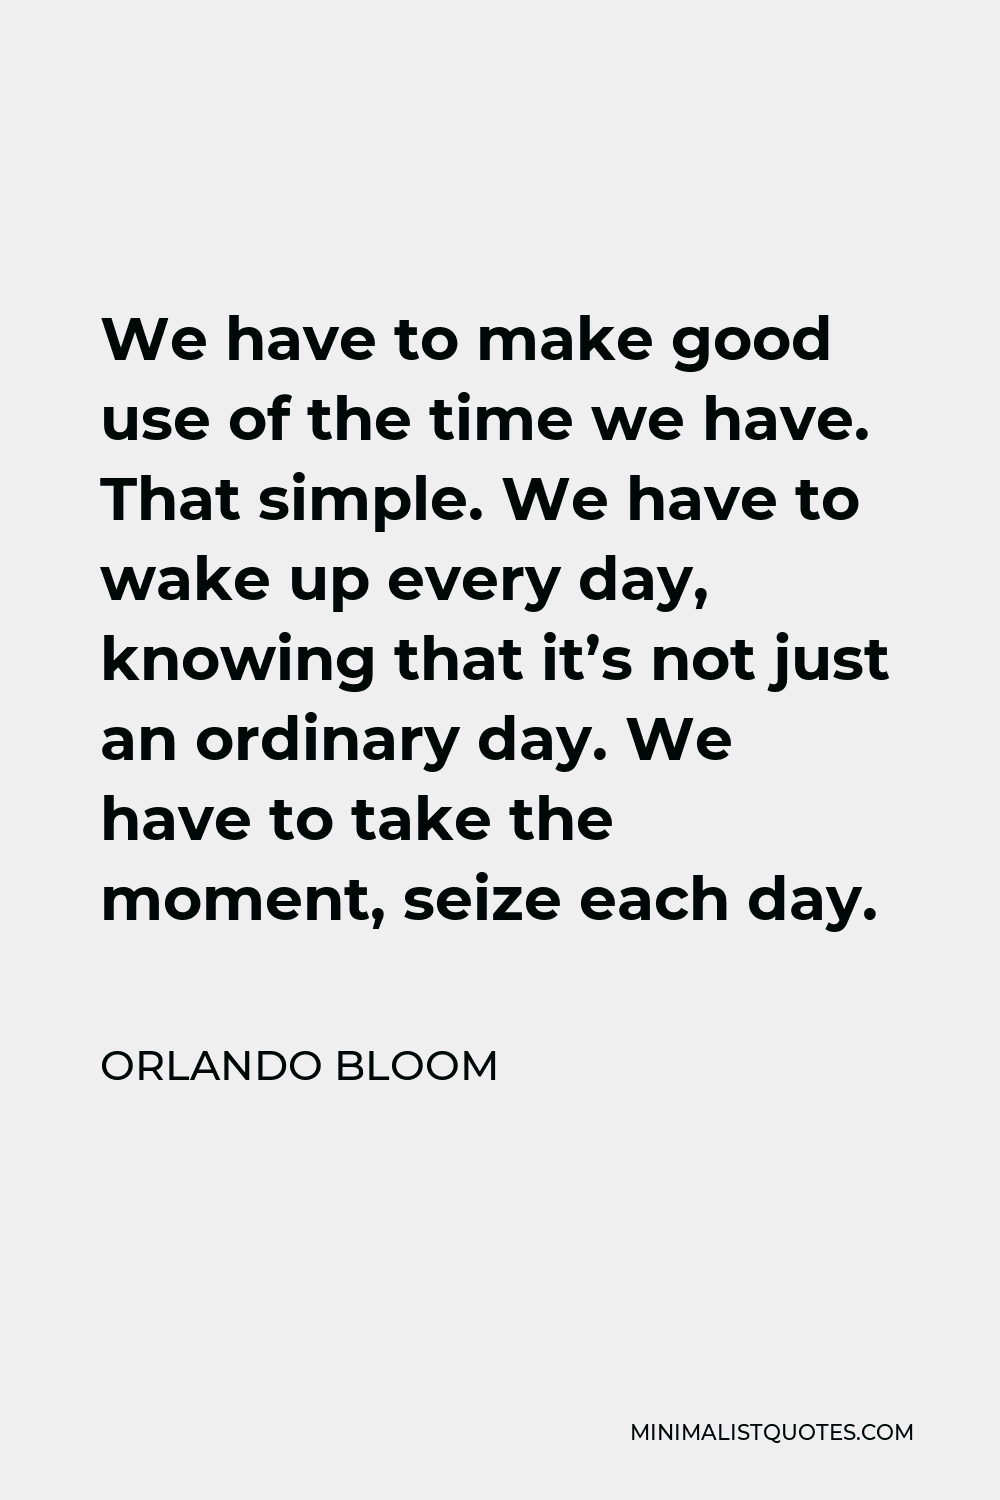 Orlando Bloom Quote - We have to make good use of the time we have. That simple. We have to wake up every day, knowing that it’s not just an ordinary day. We have to take the moment, seize each day.